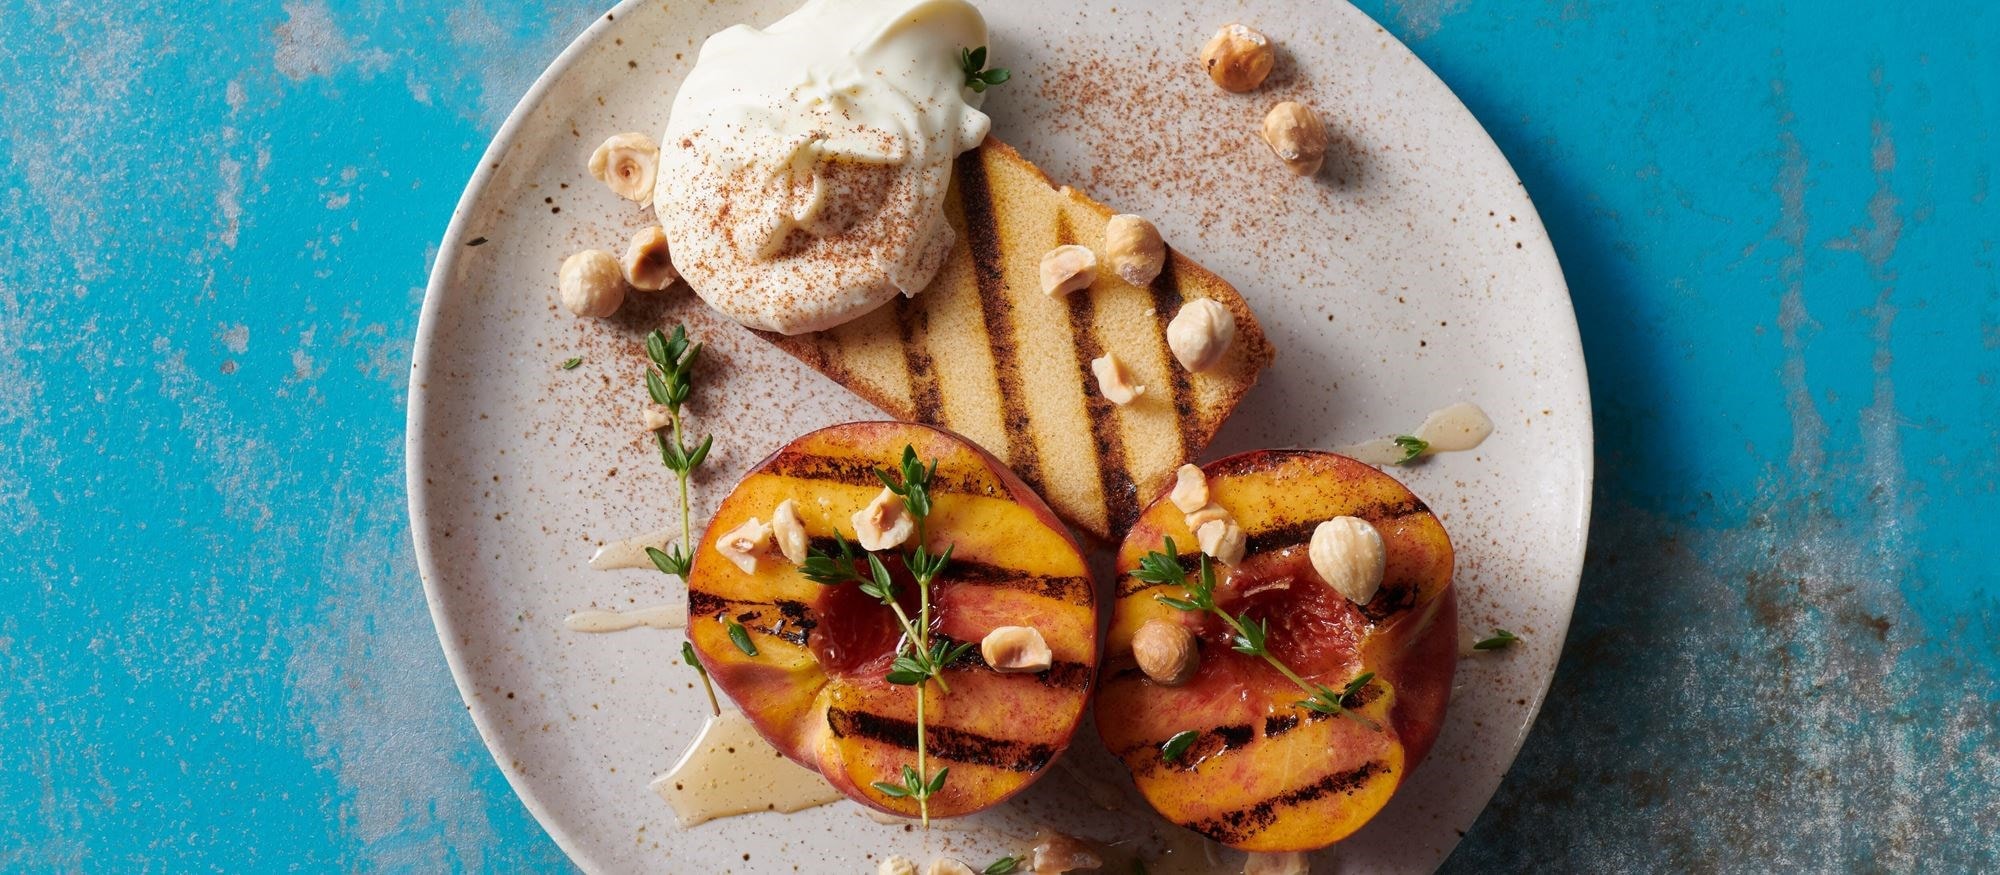 Easy and delicious Grilled Peaches and Pound Cake recipe using the Full Range Mode setting of your Wolf Oven